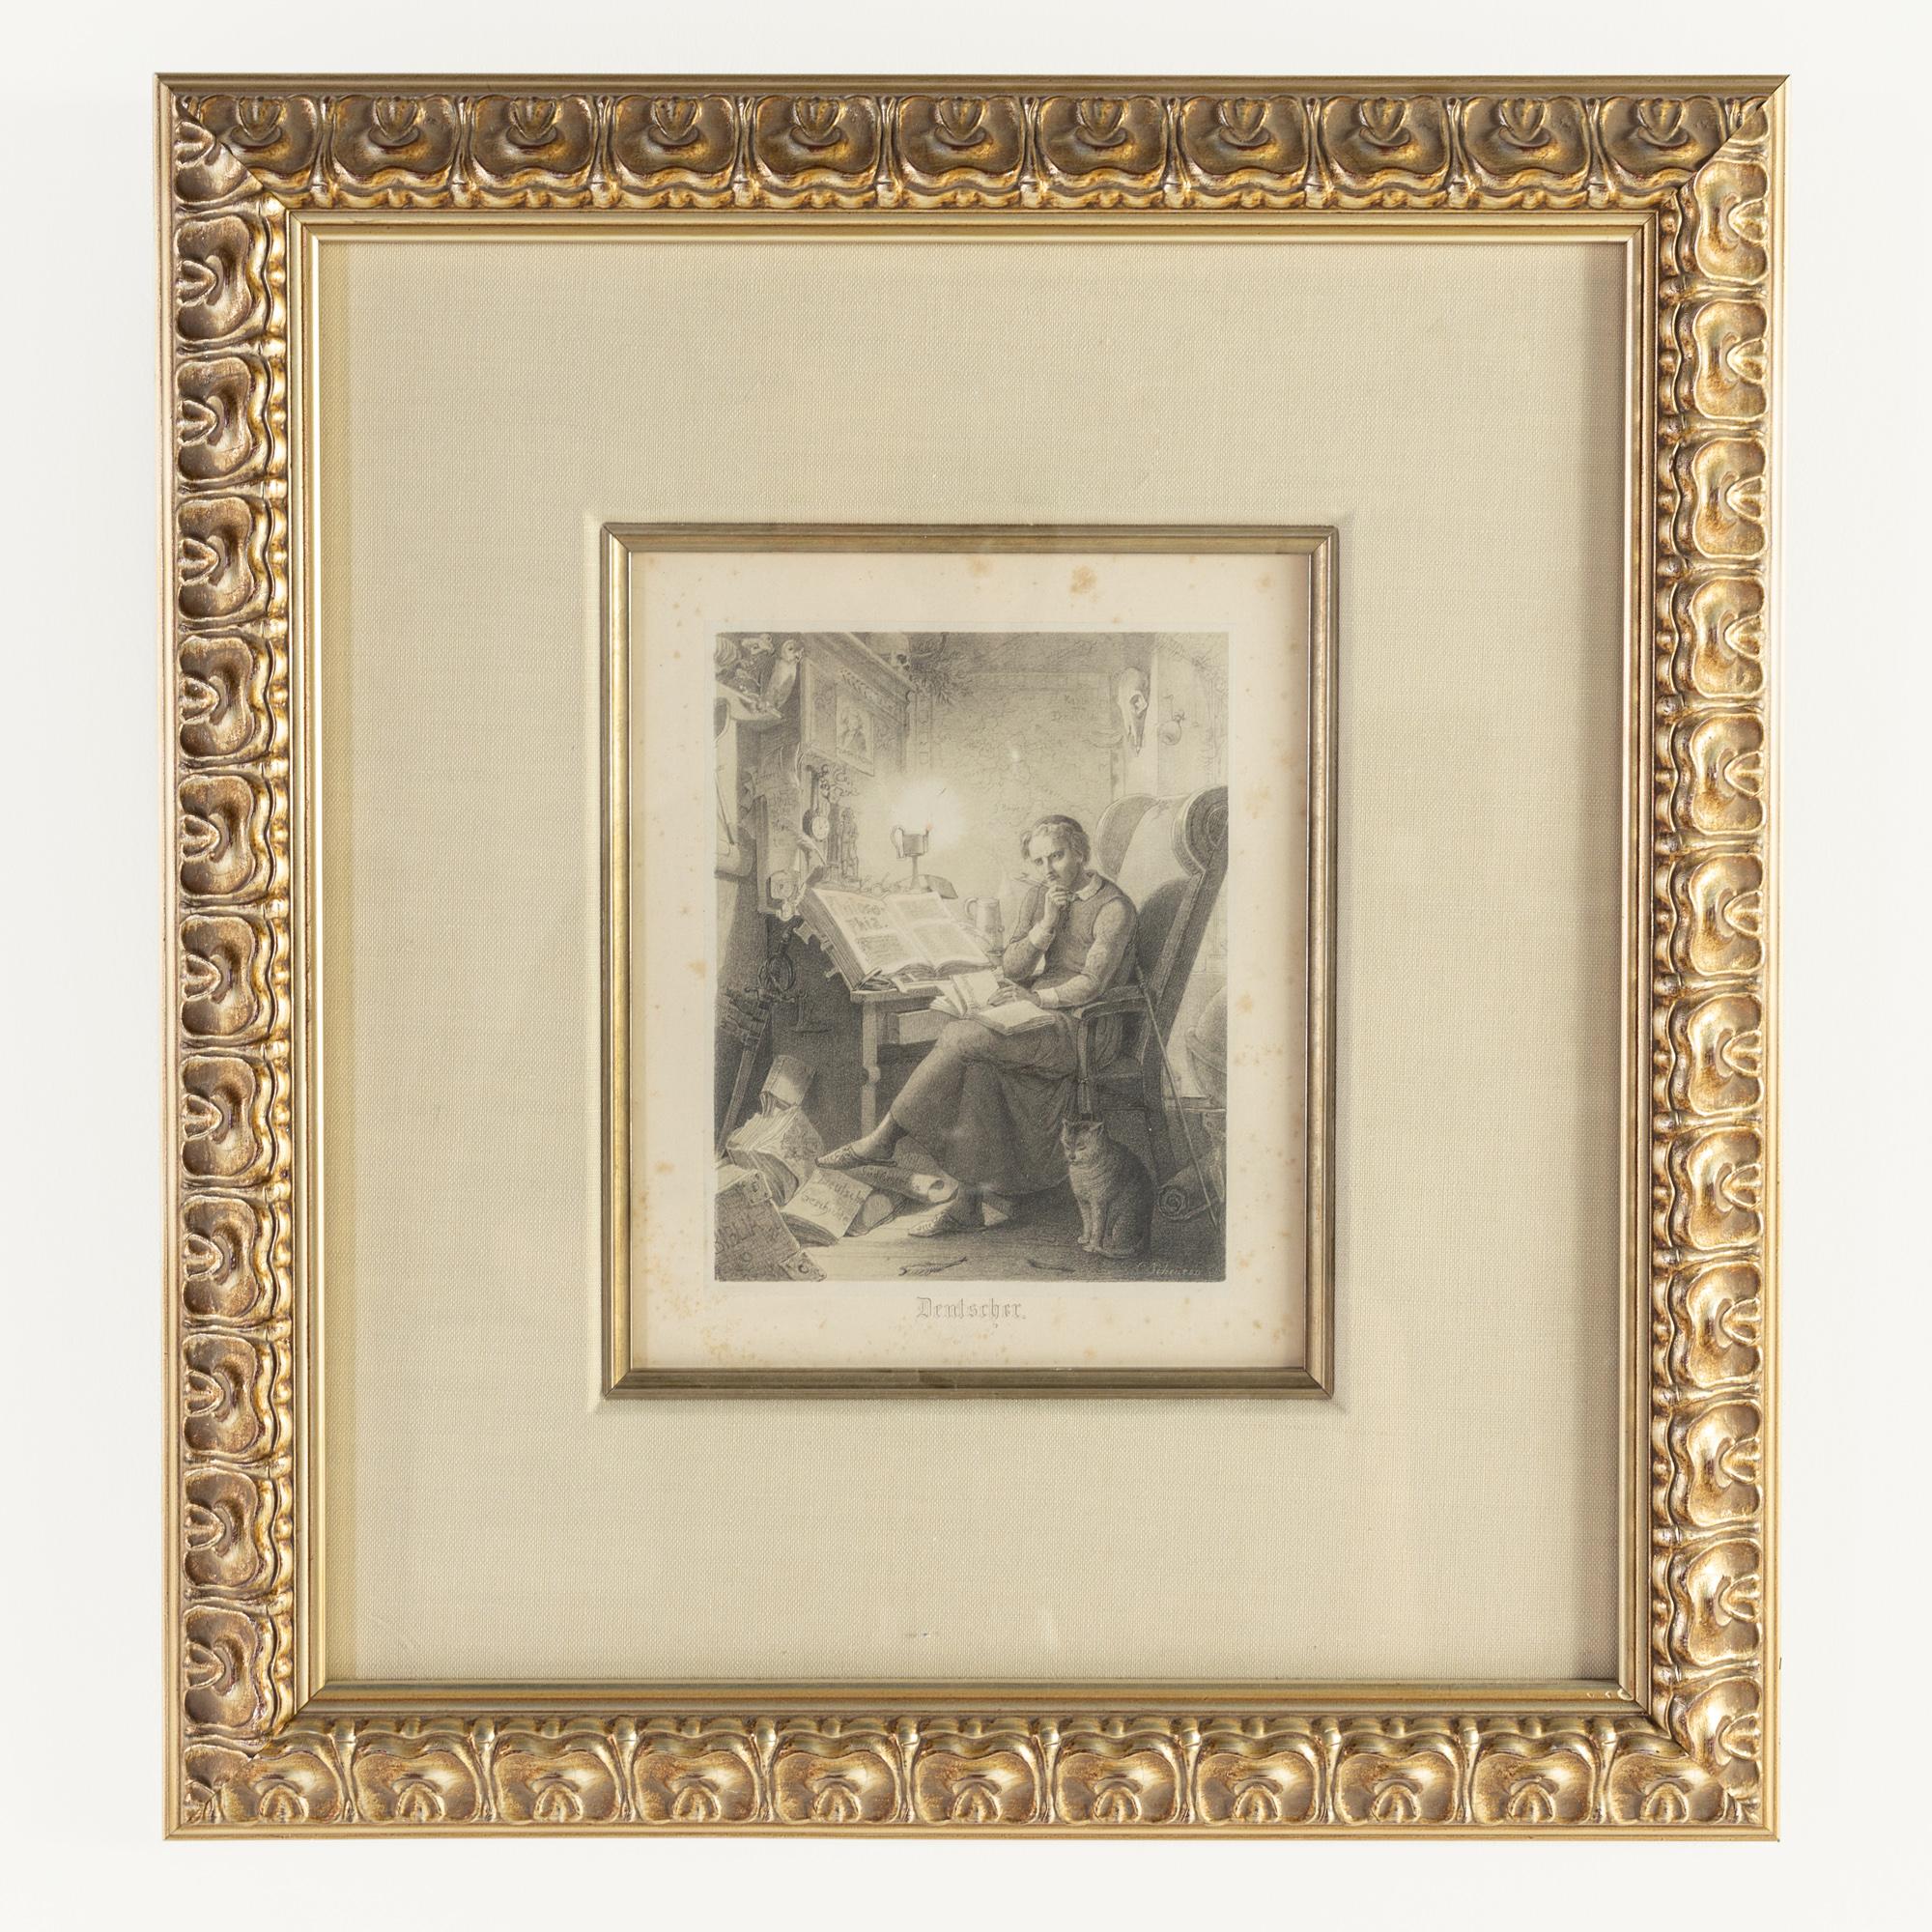 Man At Desk Framed Print

This print measures: 18 wide x 2 deep x 19 inches high

This print is in Great Vintage Condition with minor marks, dents, and wear.

We take our photos in a controlled lighting studio to show as much detail as